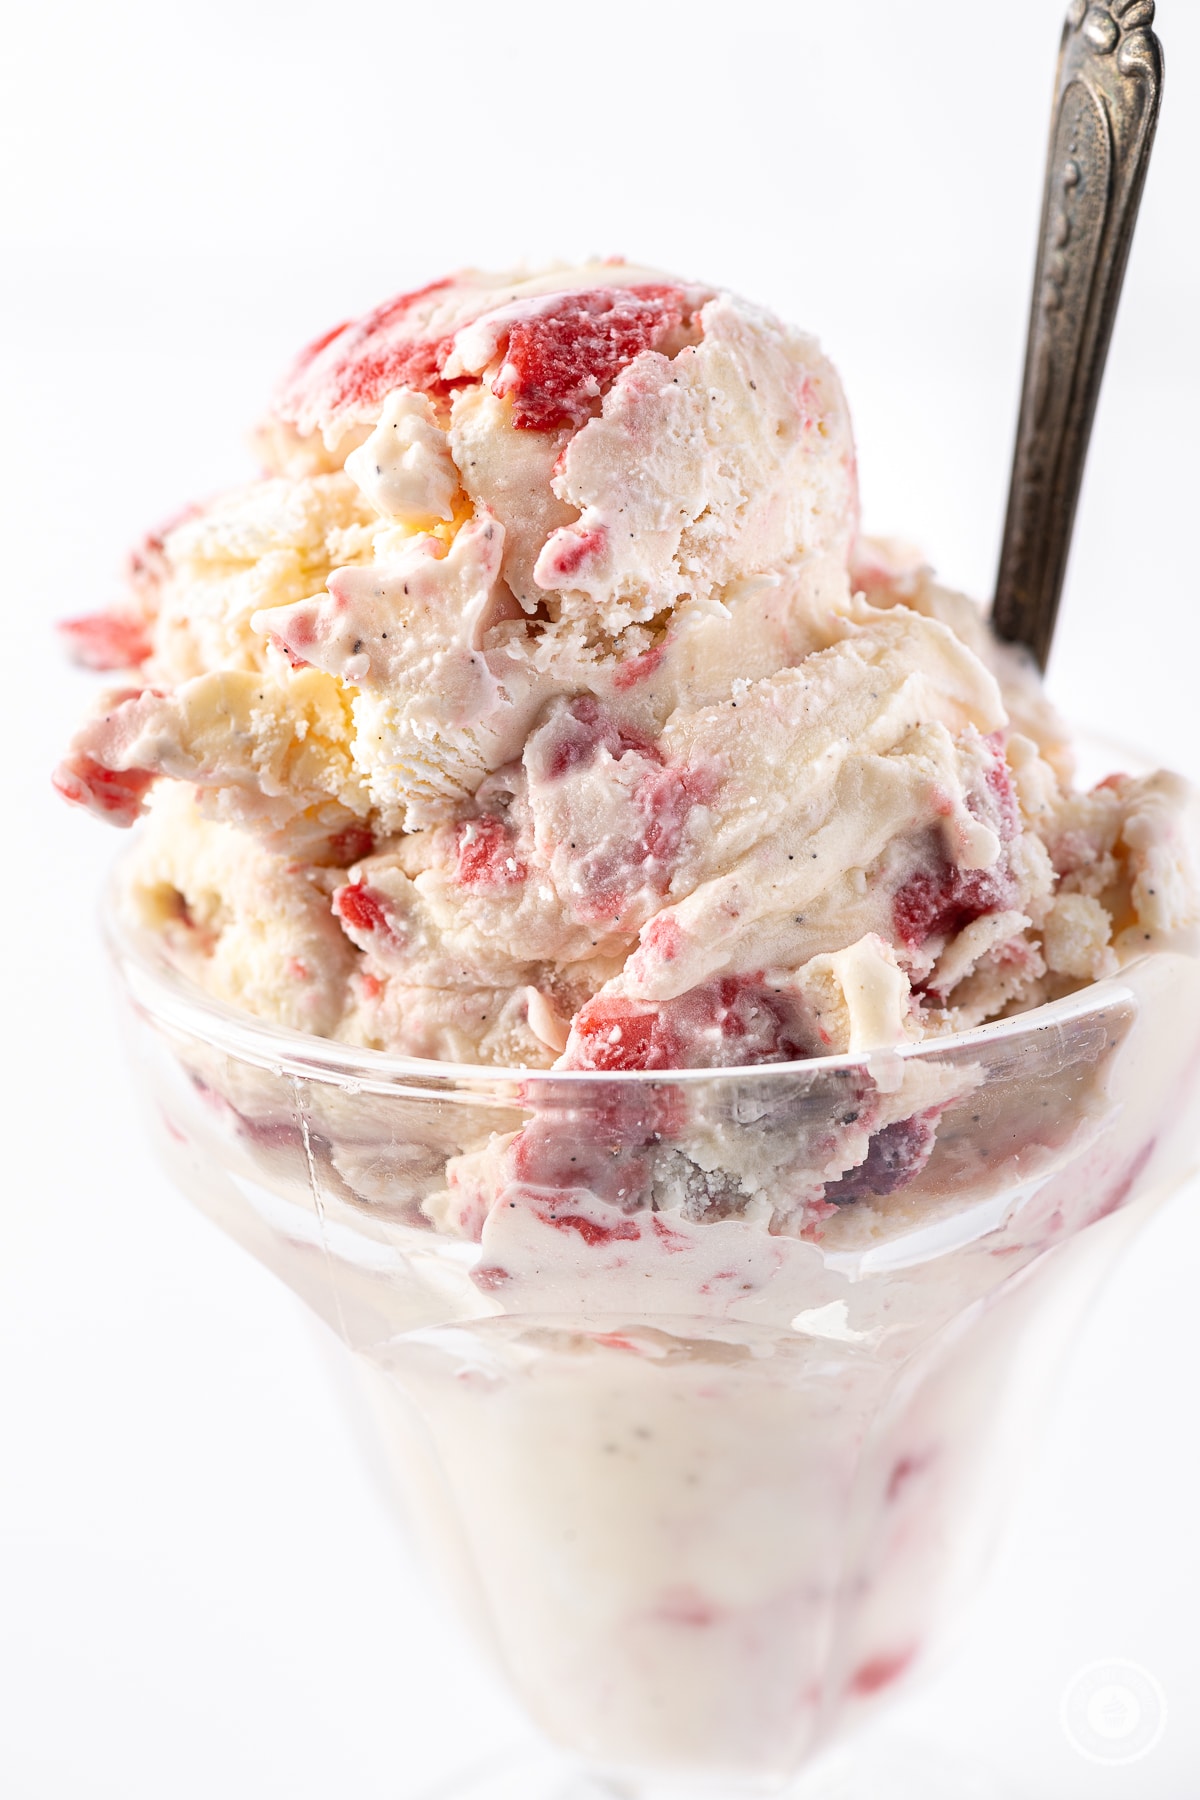 Strawberry cheesecake ice cream scooped into a glass sundae dish with vintage spoon.  